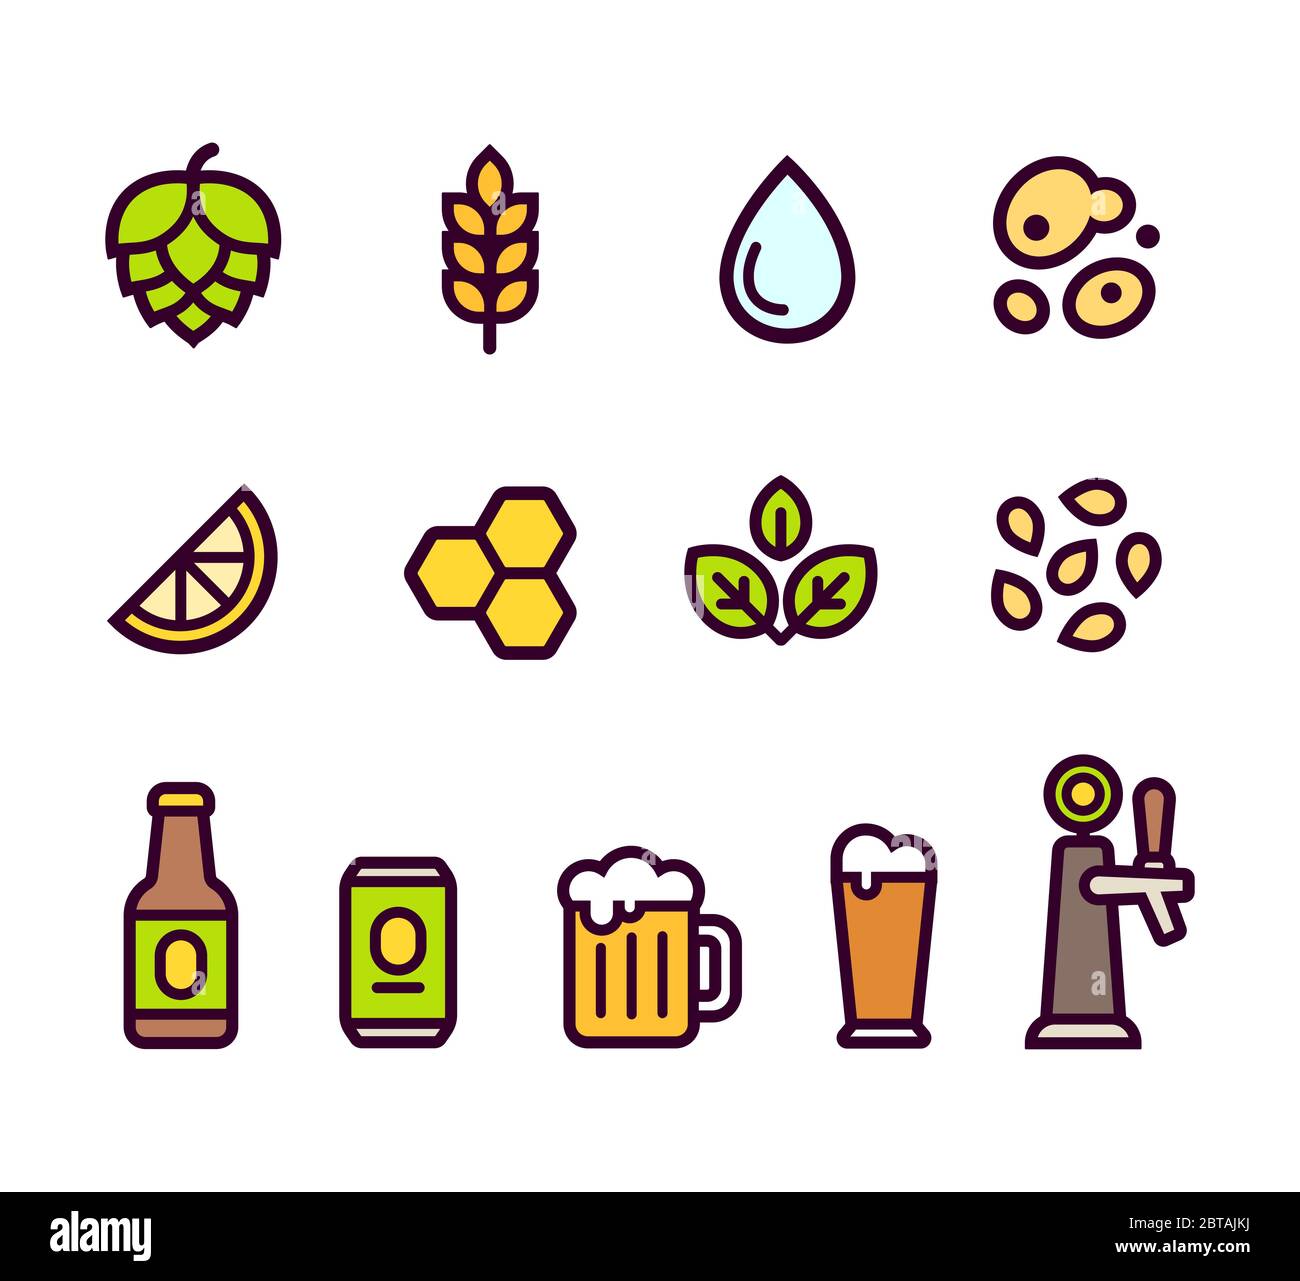 Beer icon set. Beer brewing ingredients and flavorings, serving glasses and containers. Simple cartoon line icons, vector illustration. Stock Vector